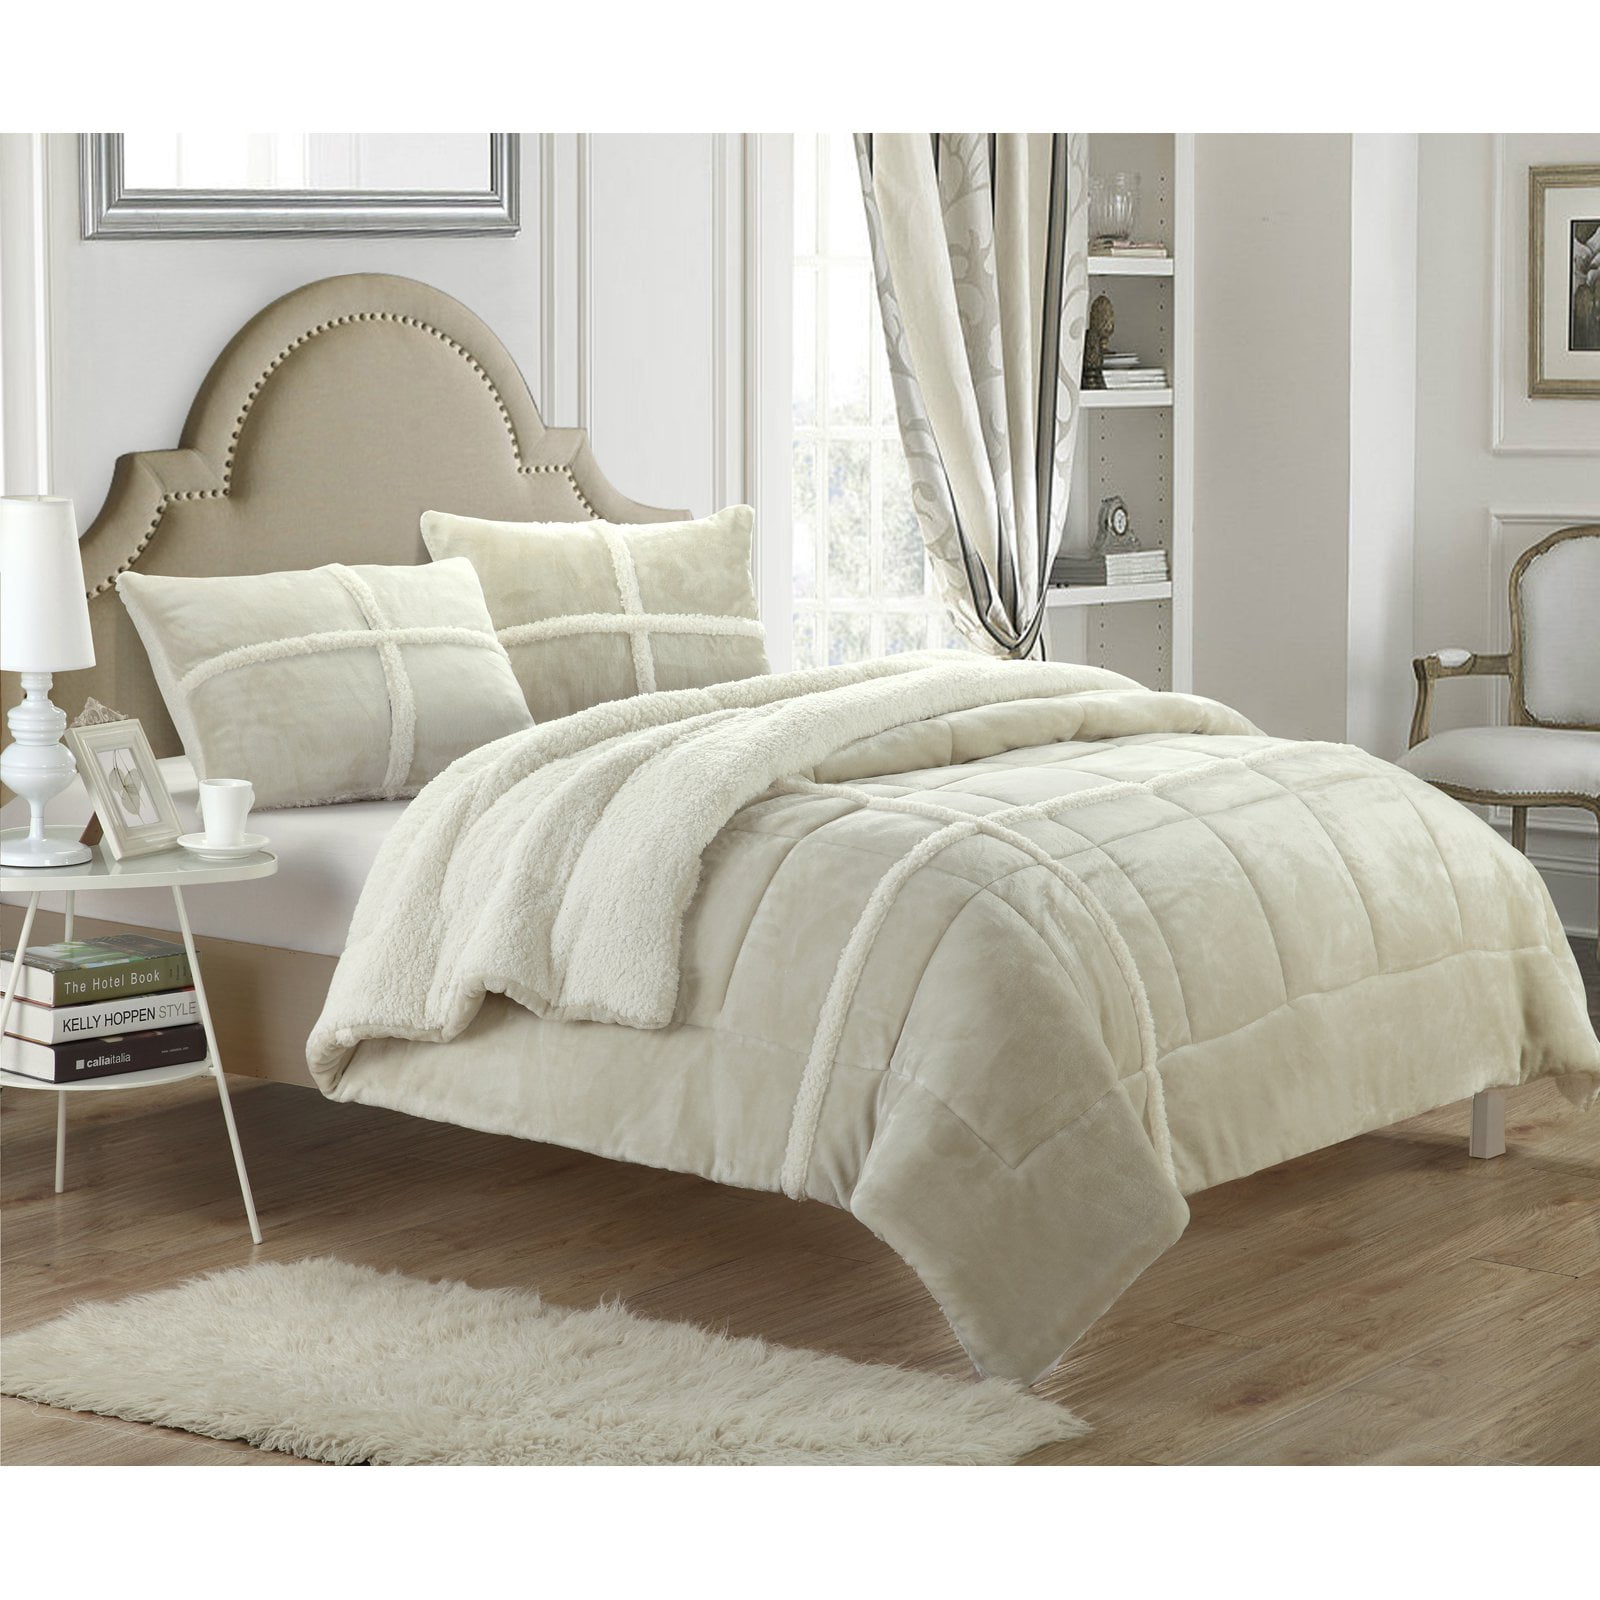 Details about   Chic Home Evie 3 Piece Blanket Set Soft Sherpa Lined Microplush Faux Mink with S 